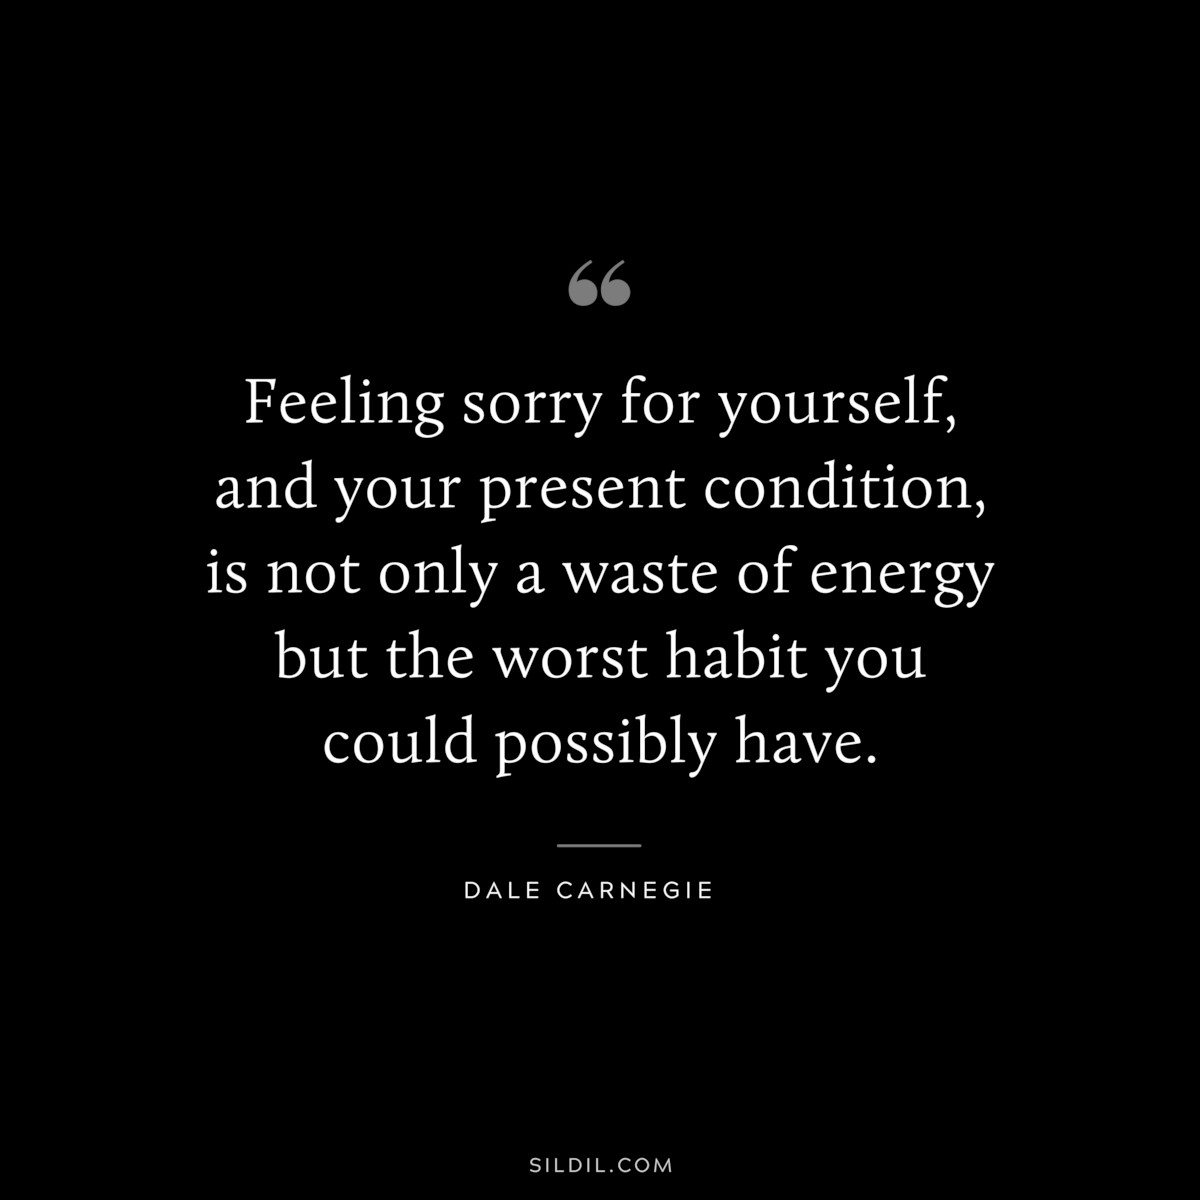 Feeling sorry for yourself, and your present condition, is not only a waste of energy but the worst habit you could possibly have.― Dale Carnegie